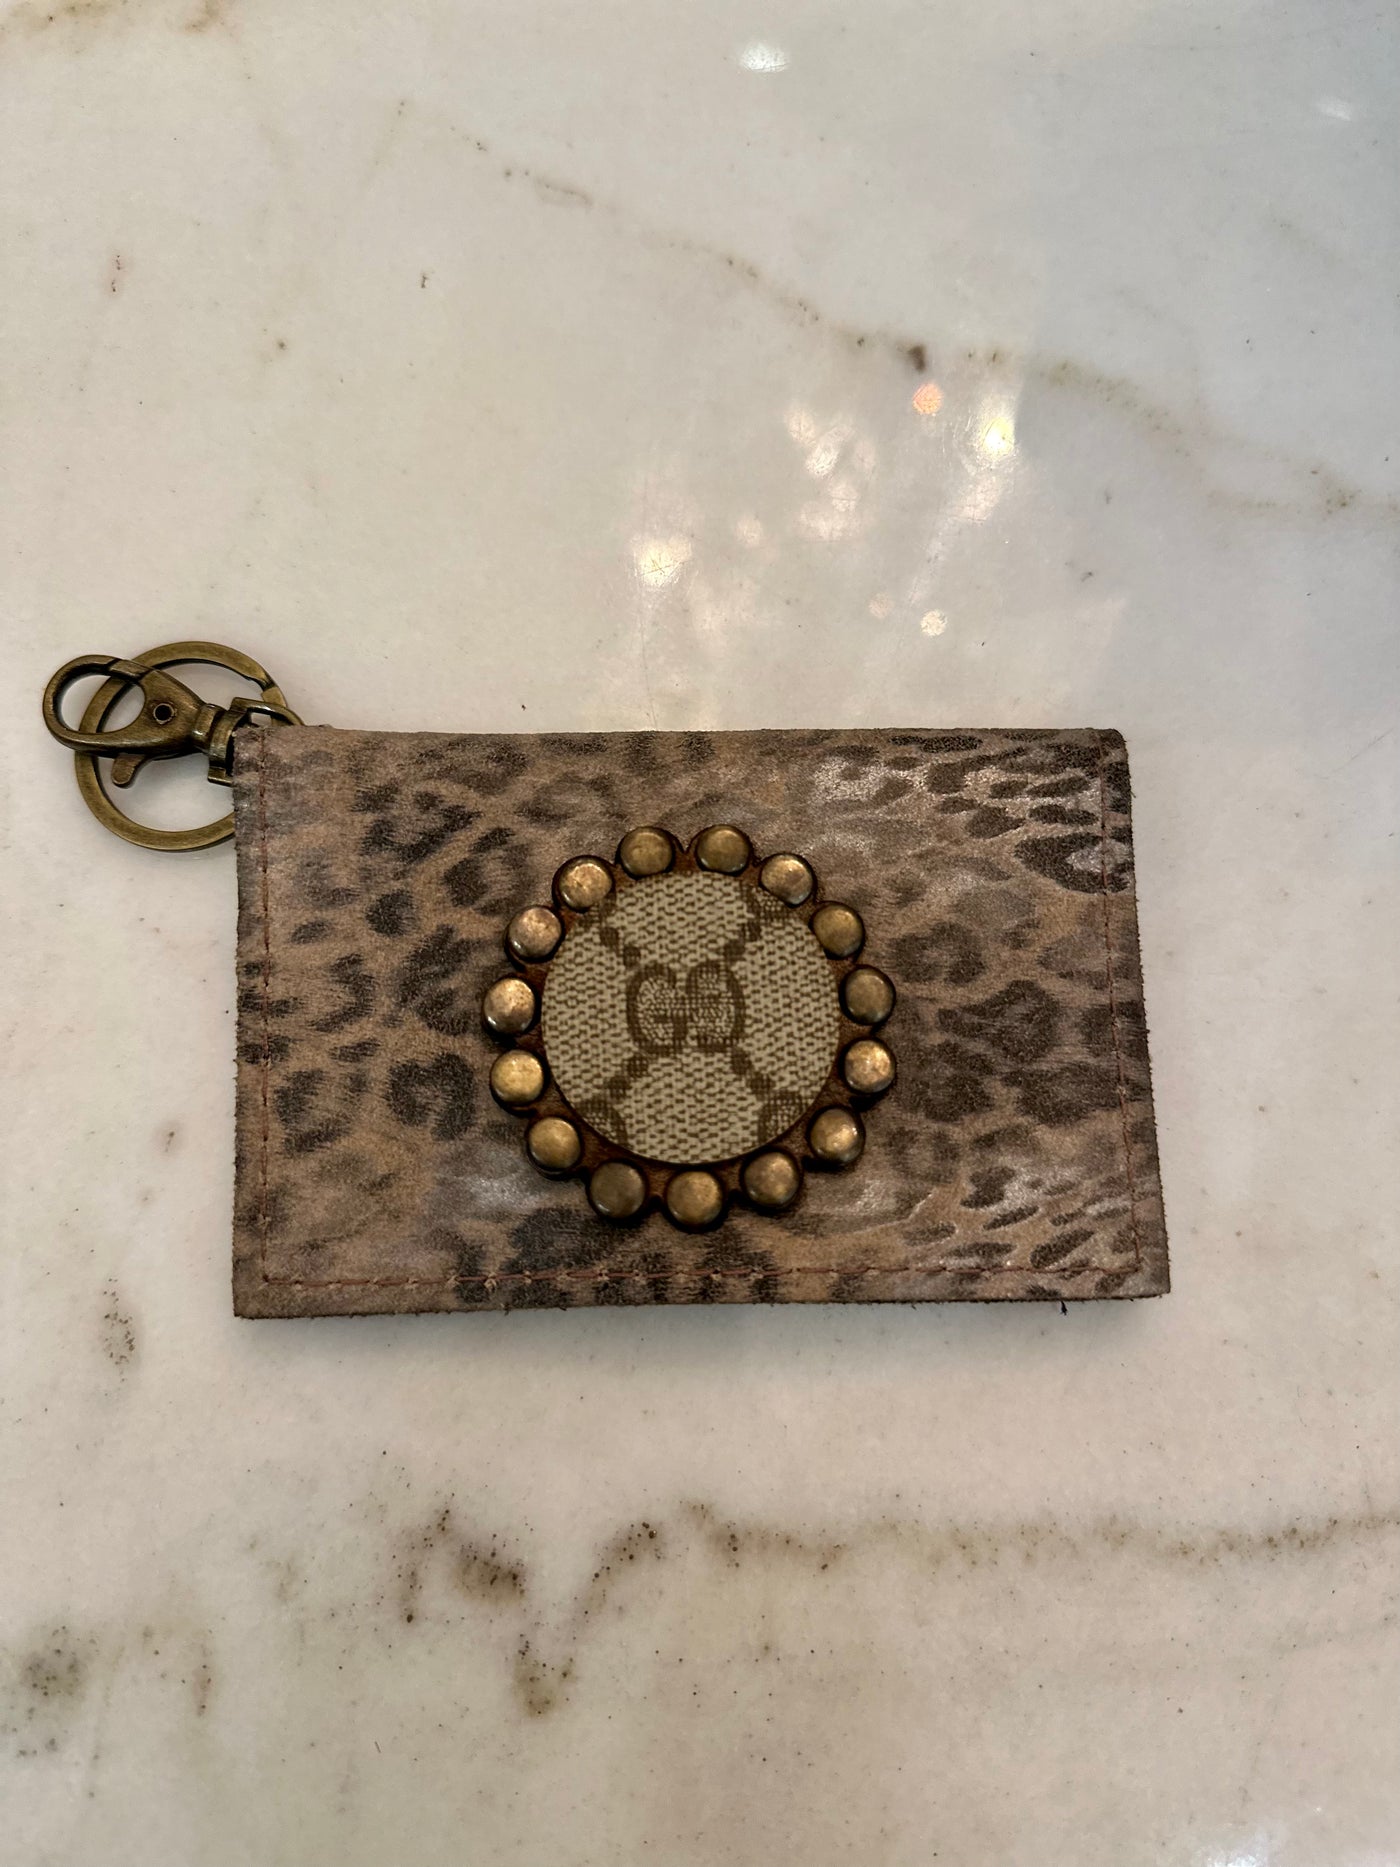 Talia Upcycled Wallet/Credit Card Holder